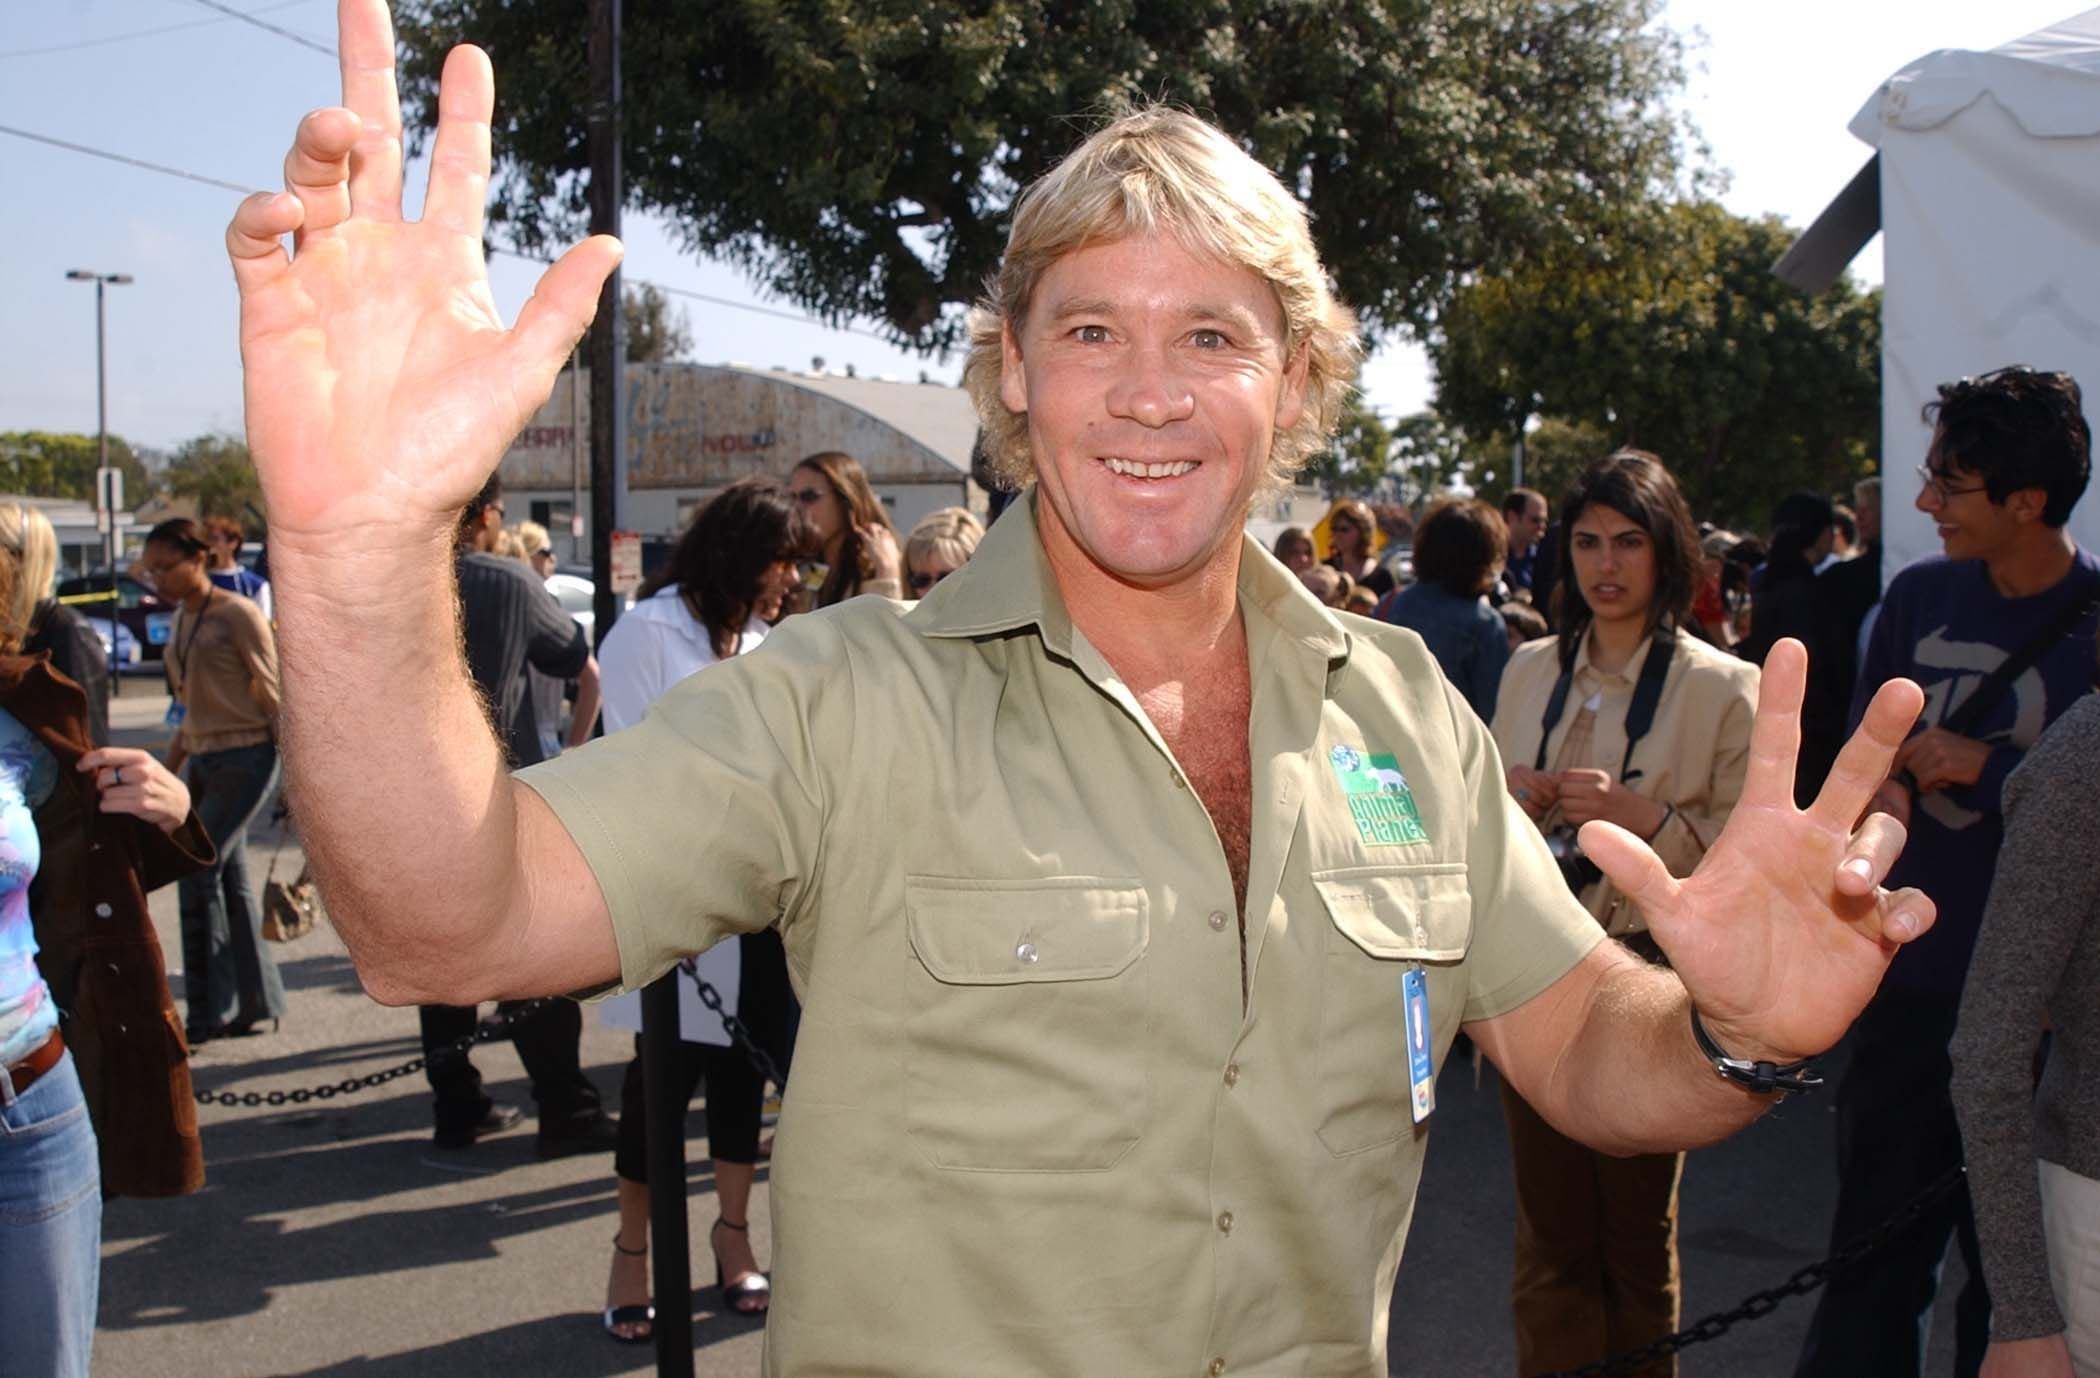 Steve Irwin at Kid's Choice Awards Arrivals in Santa Monica on April 20, 2002 | Photo: Getty Images